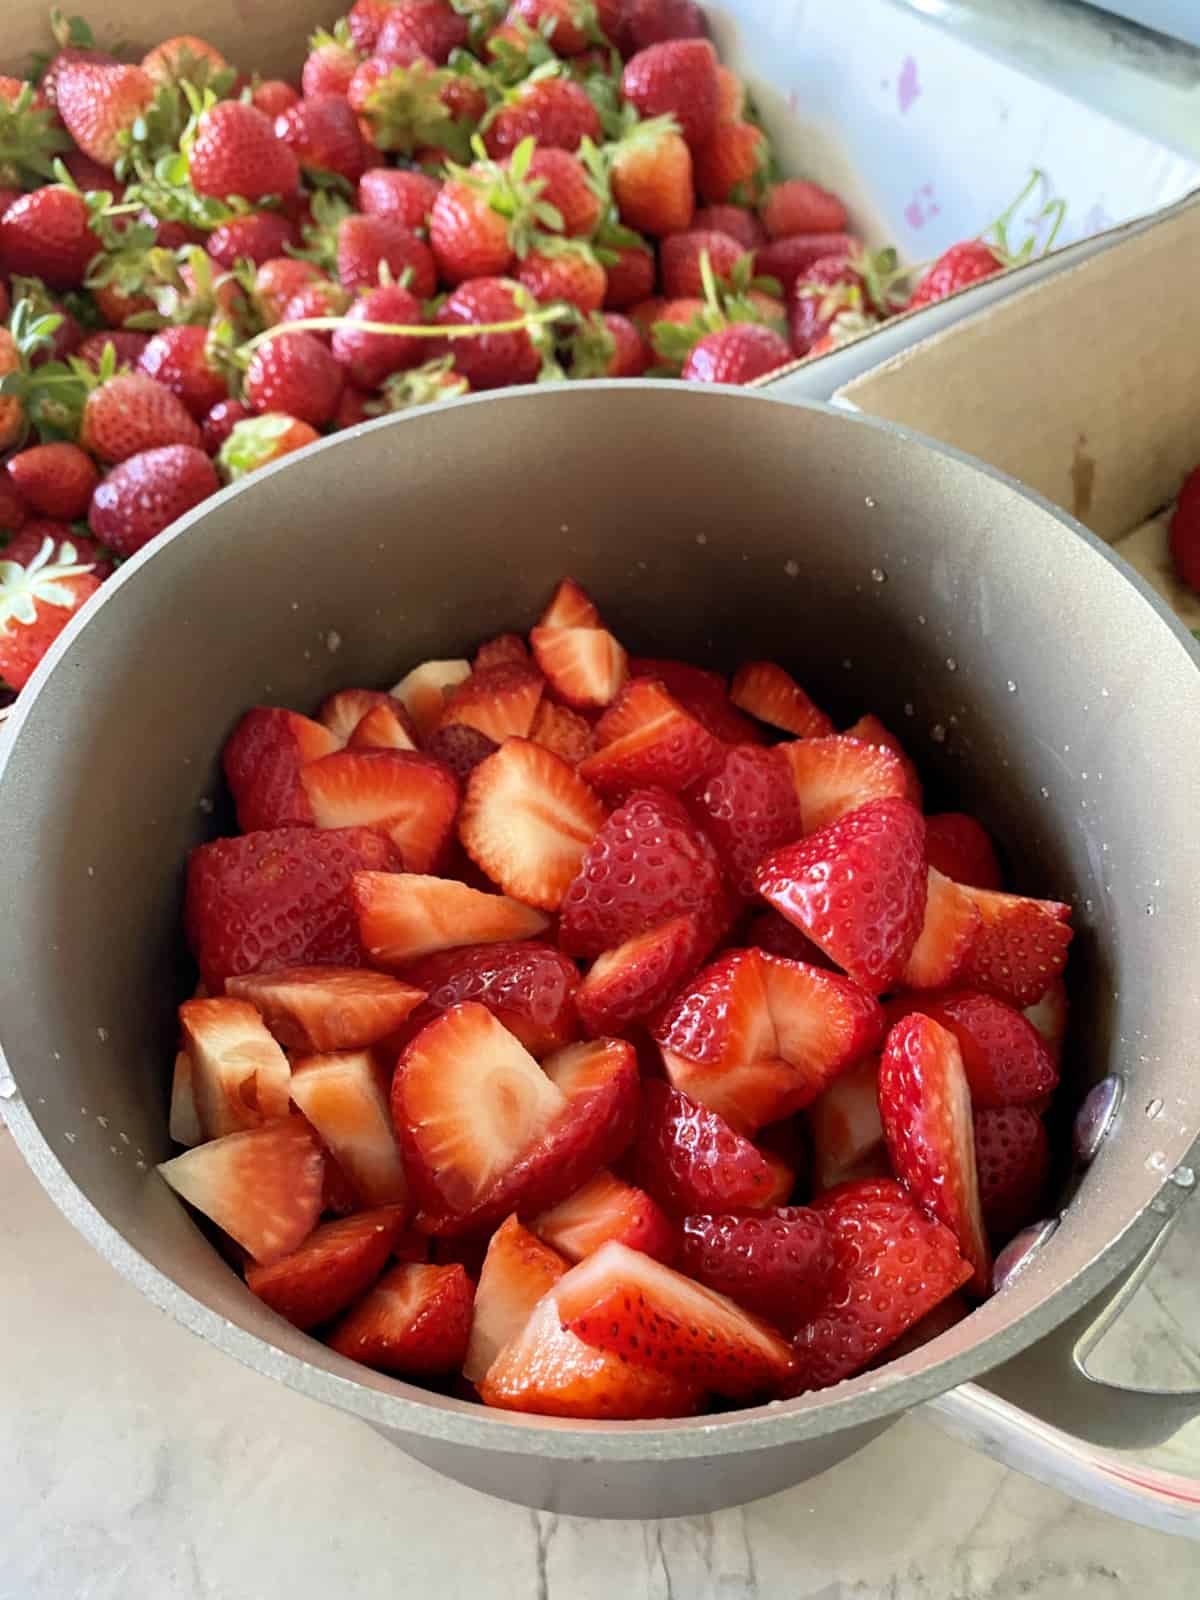 Sauce pot filled with chopped strawberries and strawberries in the background.